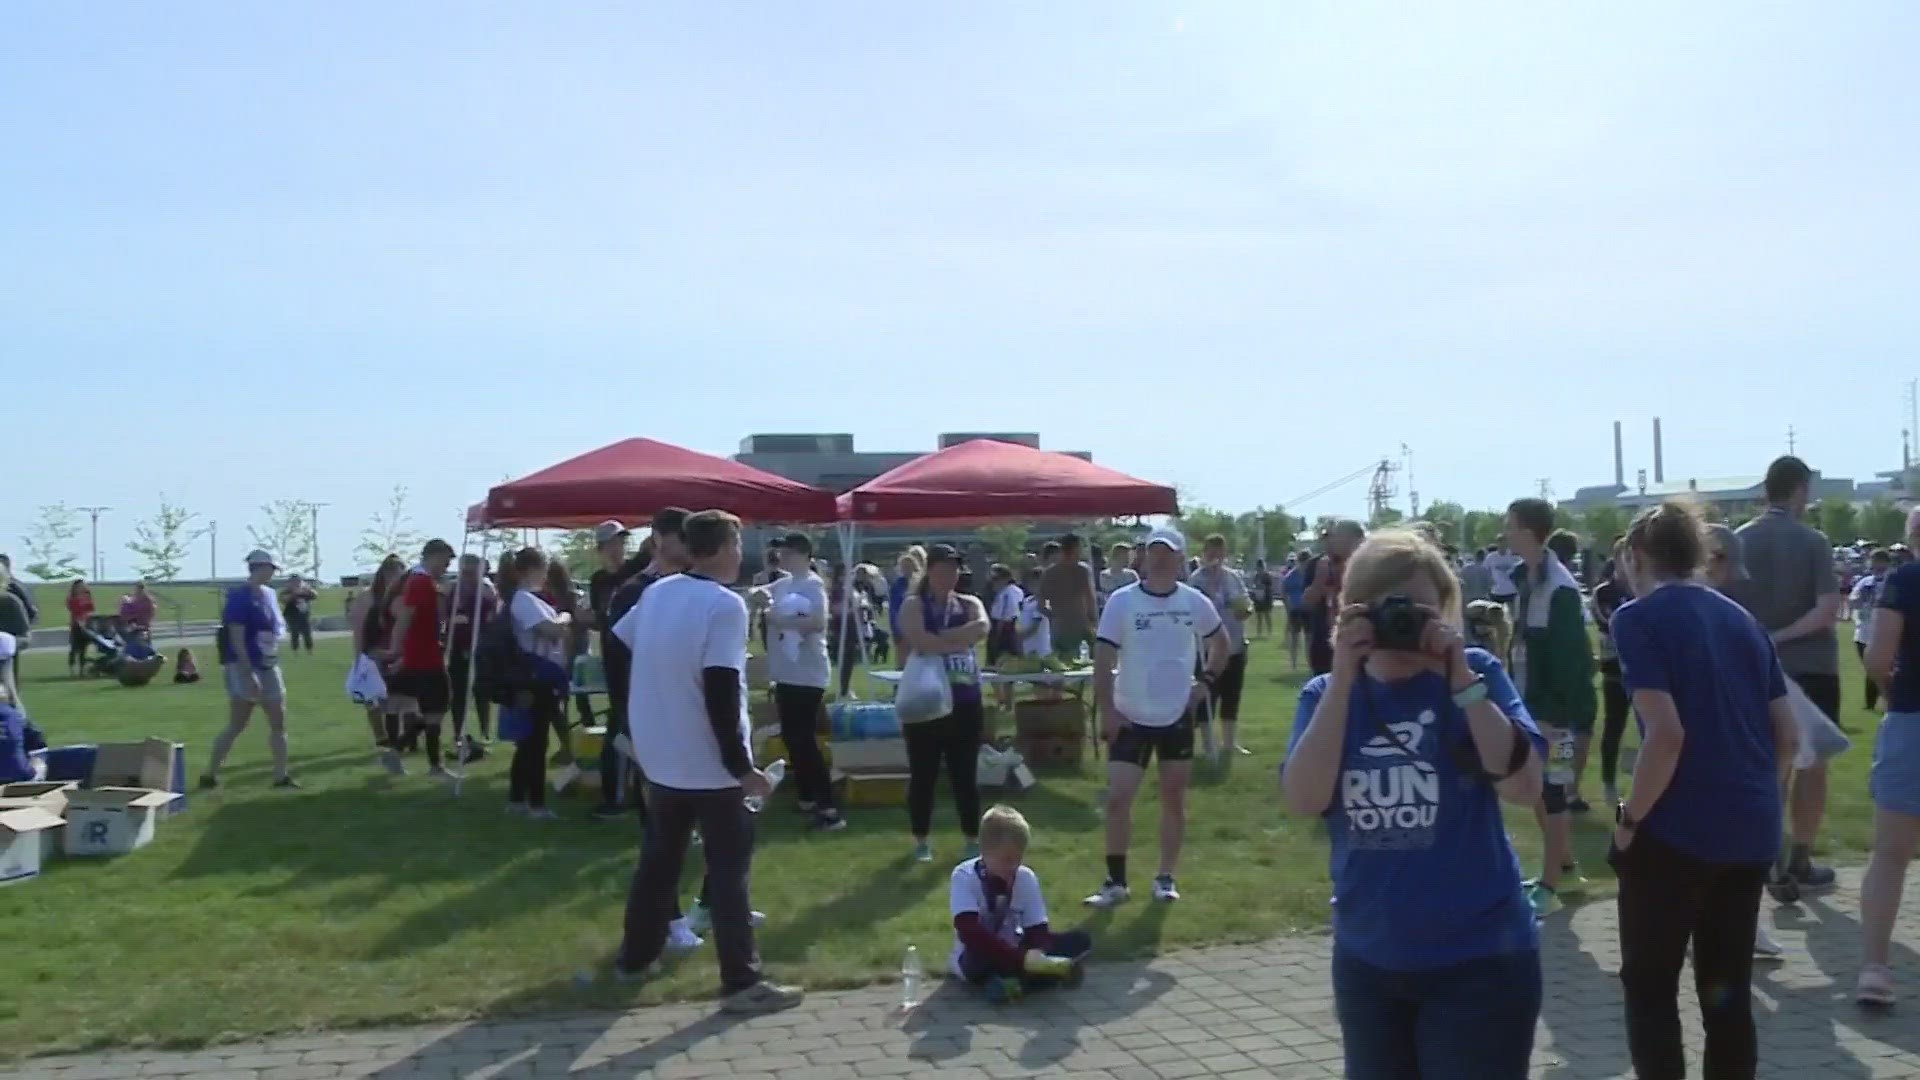 The 5K is raising money and awareness for the City Mission in Cleveland.